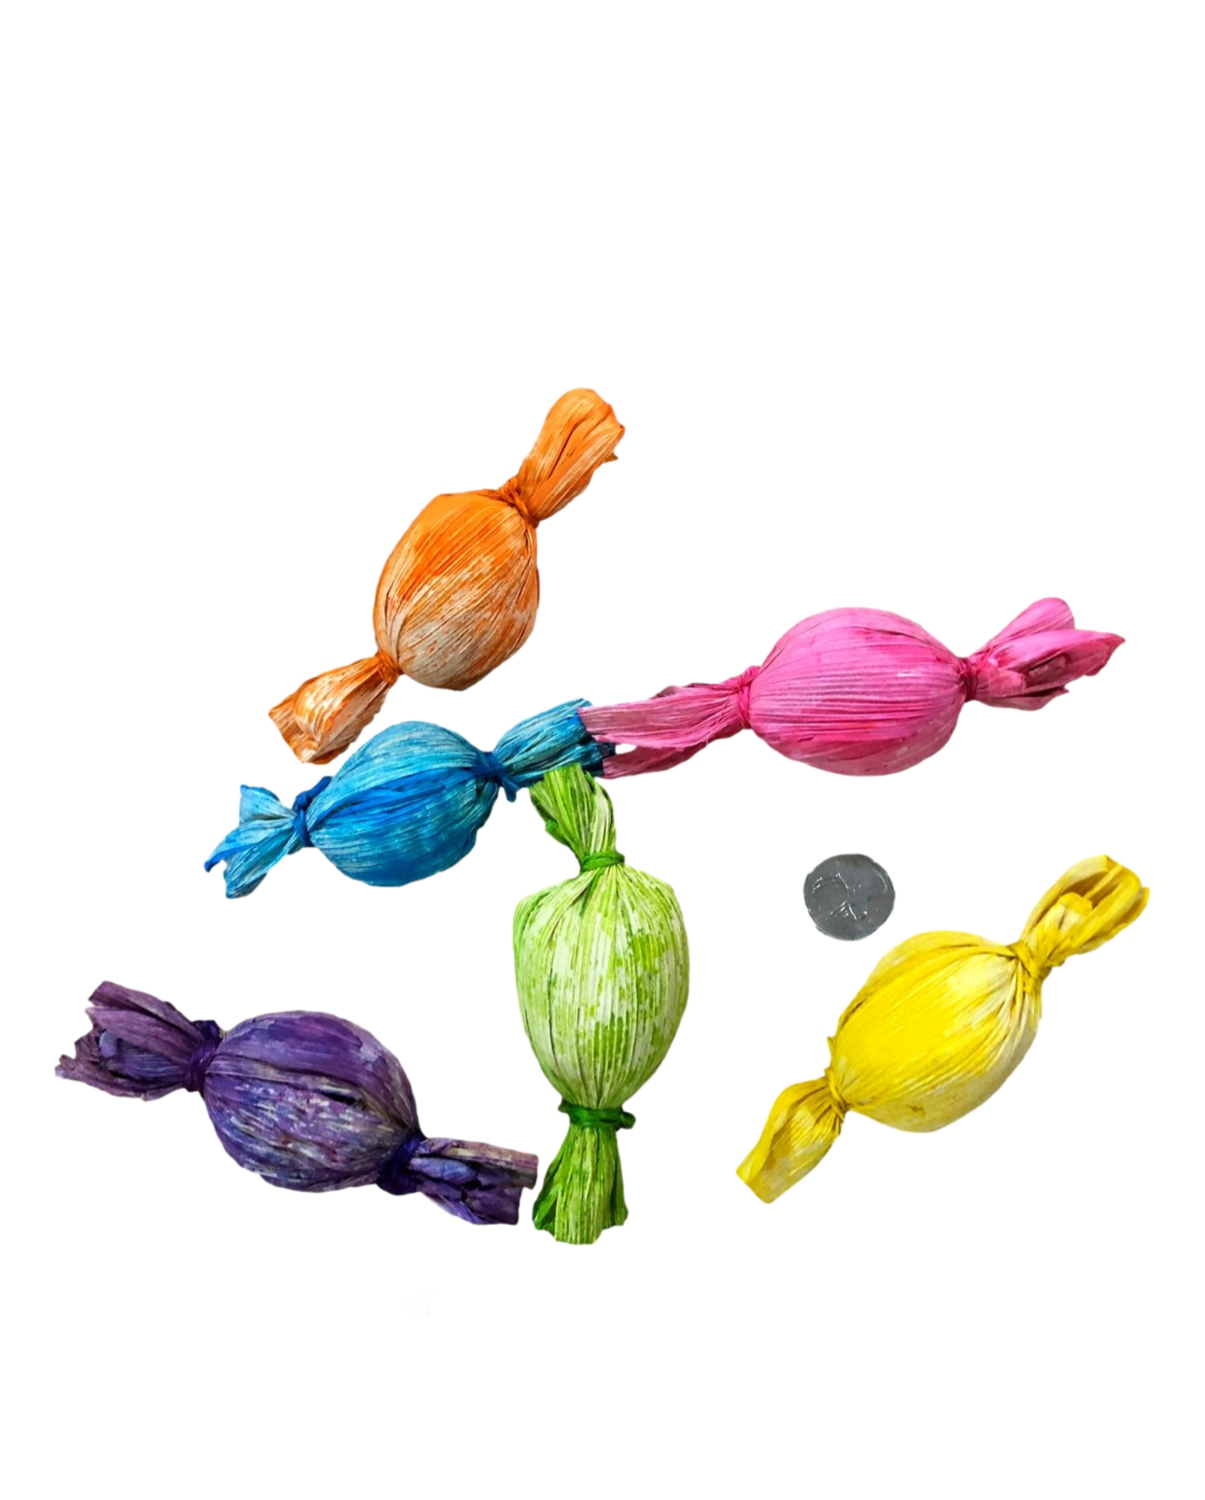 Colorful Corny "Candies" - 6 pc by Feathered Addictions